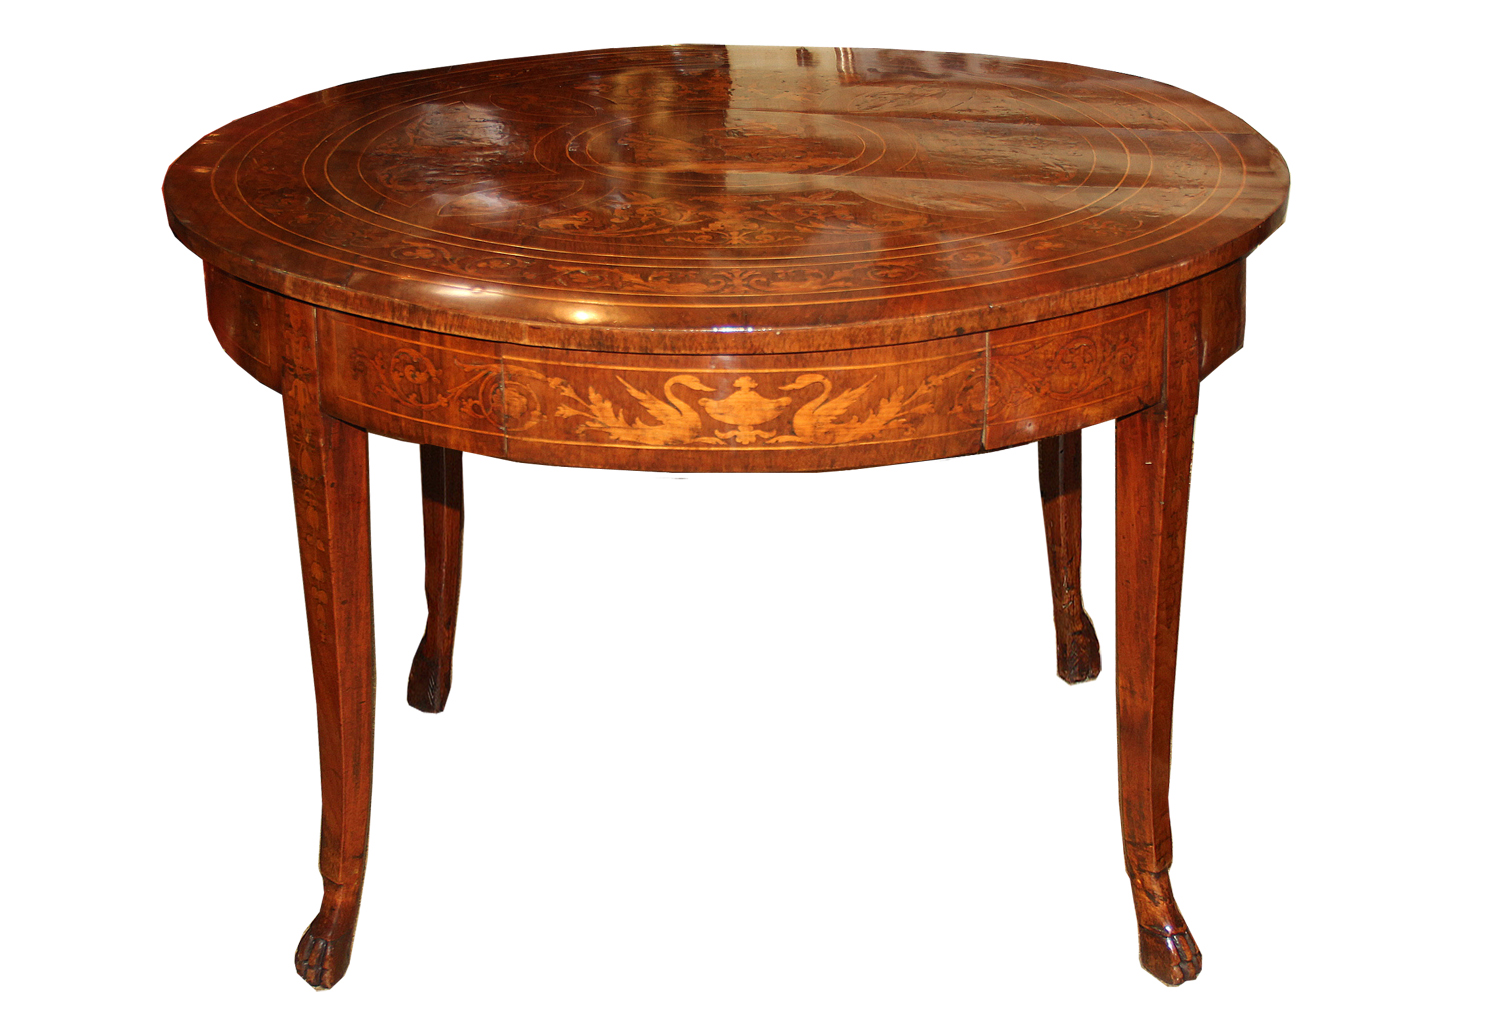 An 18th Century Milanese Marquetry Center Table No. 4526